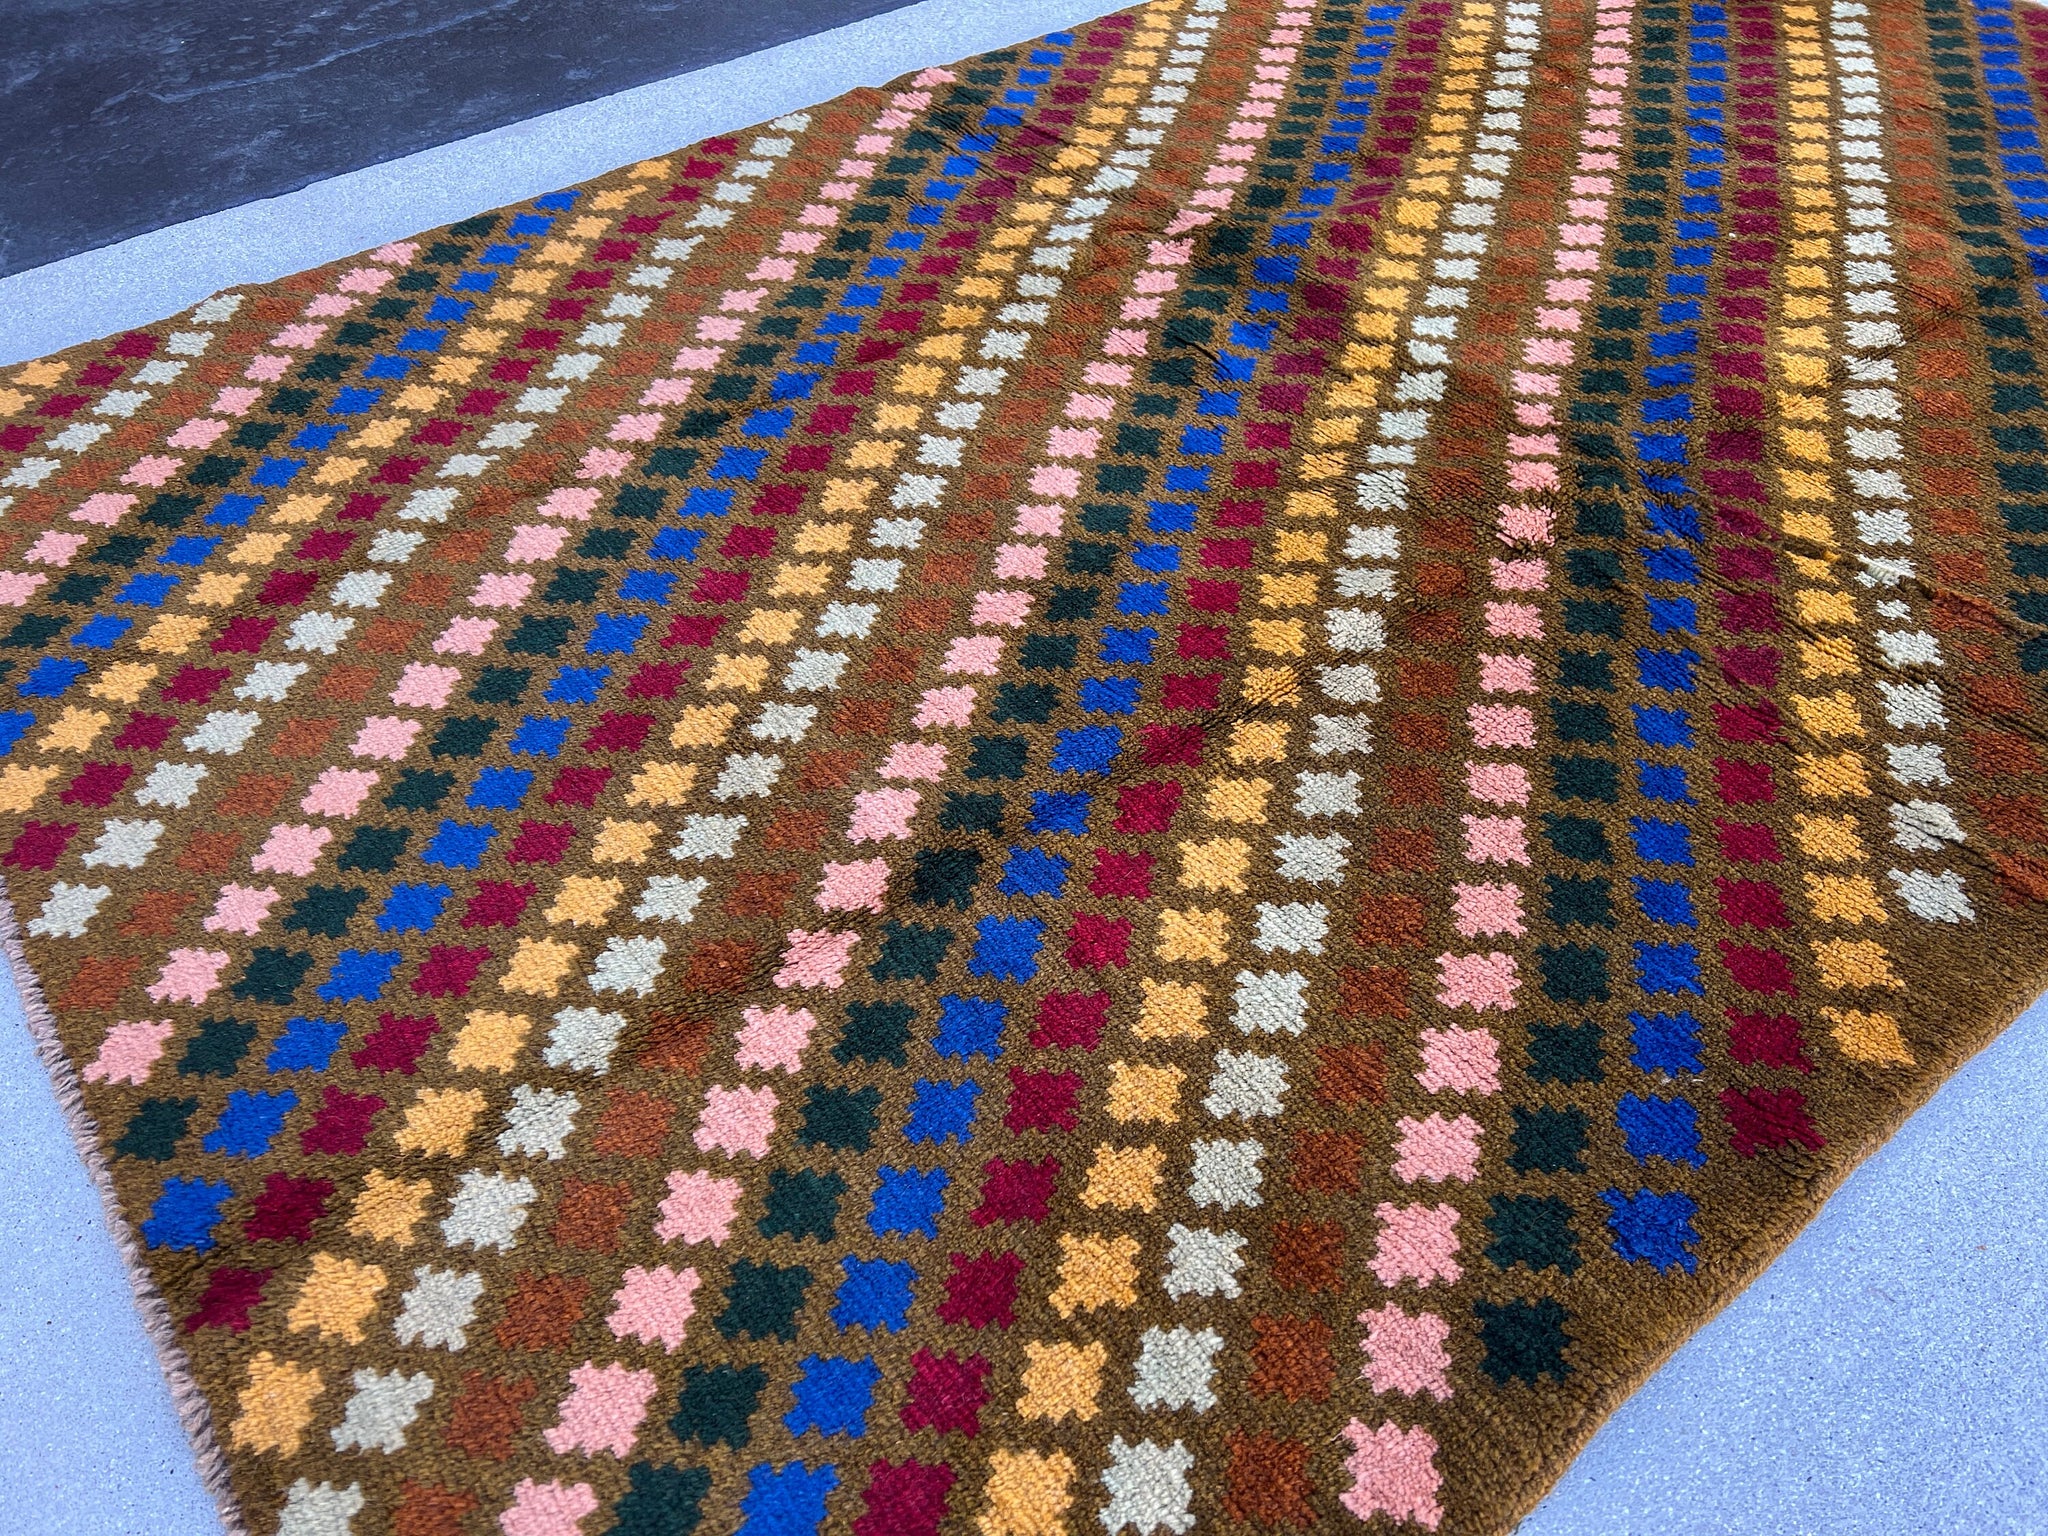 4x6 (120x185) Handmade Vintage Baluch Afghan Rug | Taupe Rose Pink Turquoise Pine Green Blue Golden Yellow Crimson Red Chocolate Brown Wool